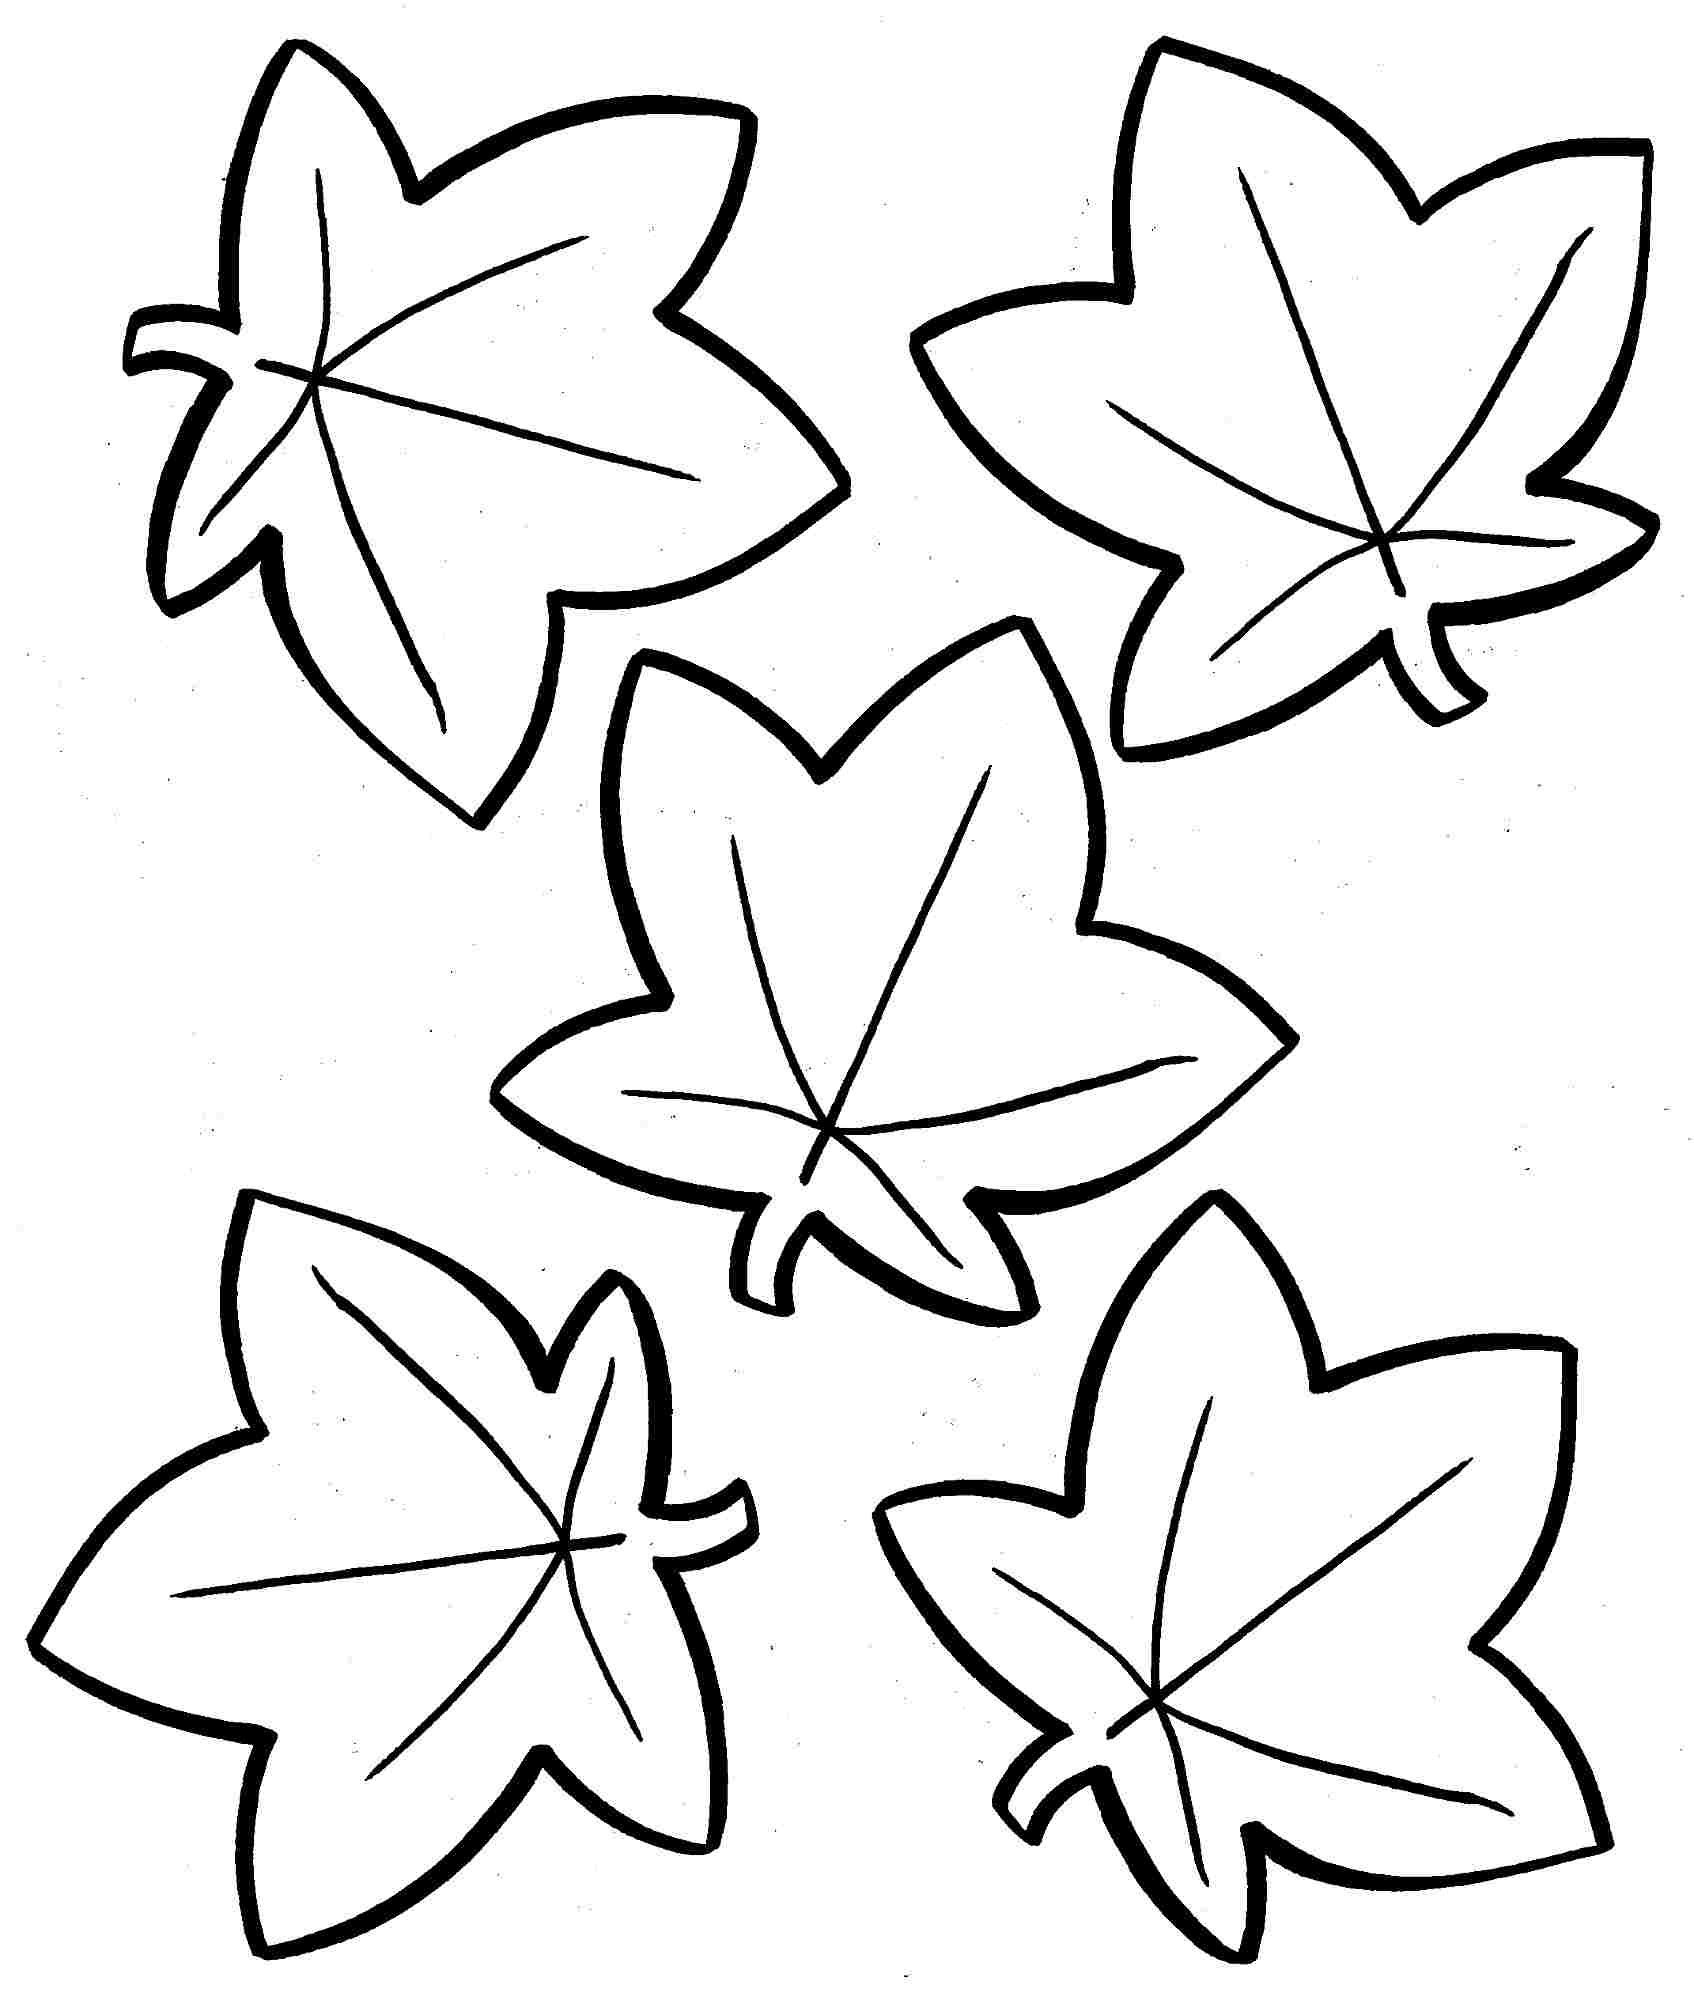 Coloring ~ Printable Fall Leaves Coloring Colored Autumn Download - Free Printable Fall Leaves Coloring Pages